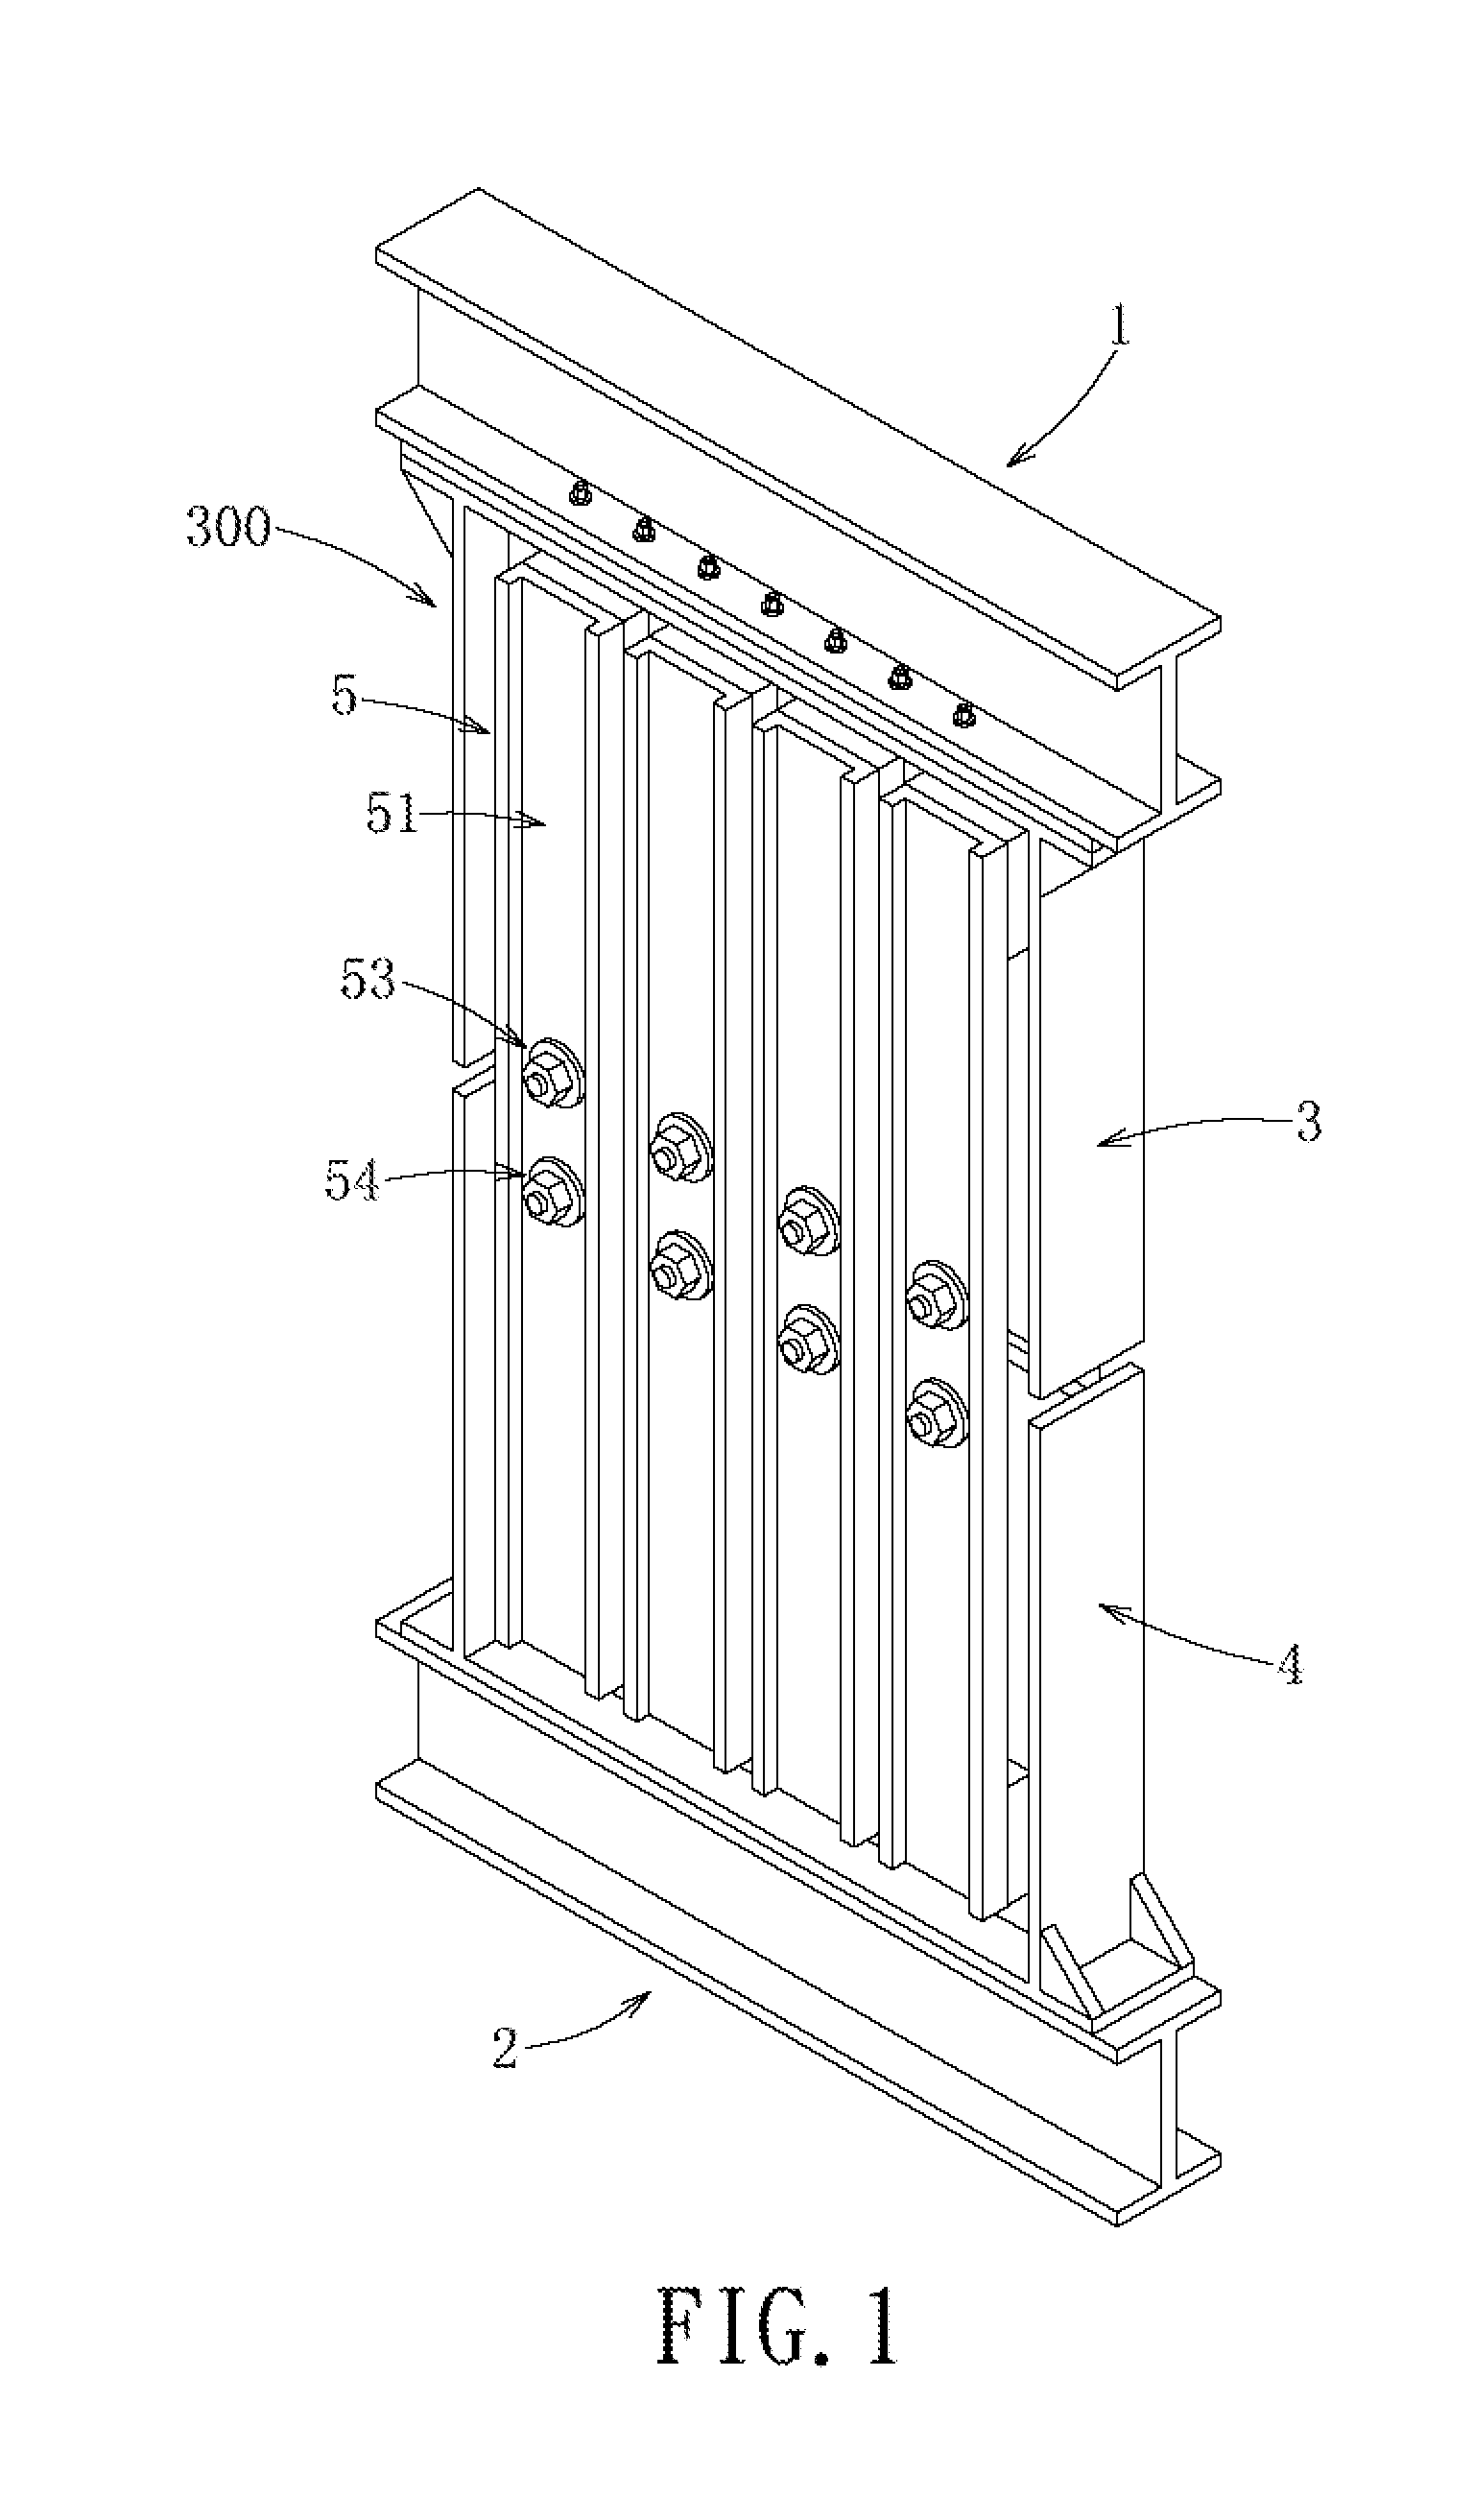 Lever viscoelastic damping wall assembly